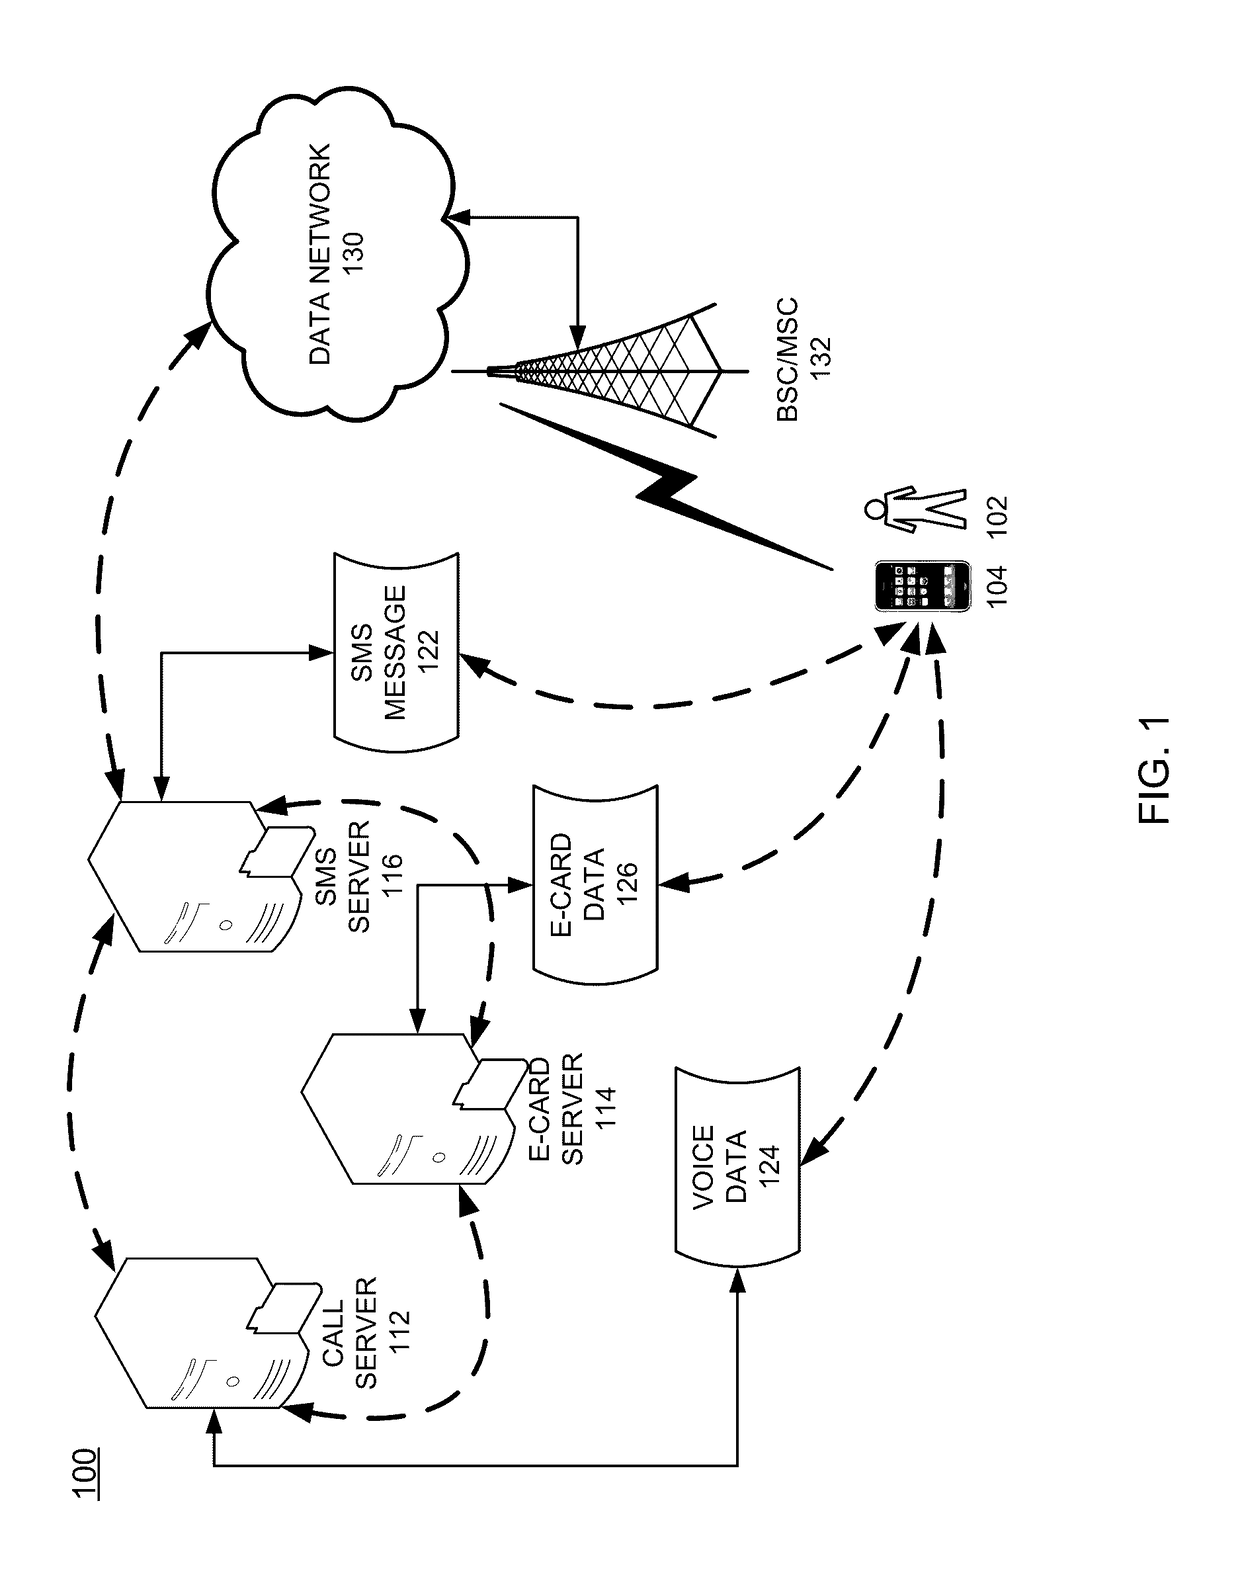 Electronic card delivery and communication channel integration